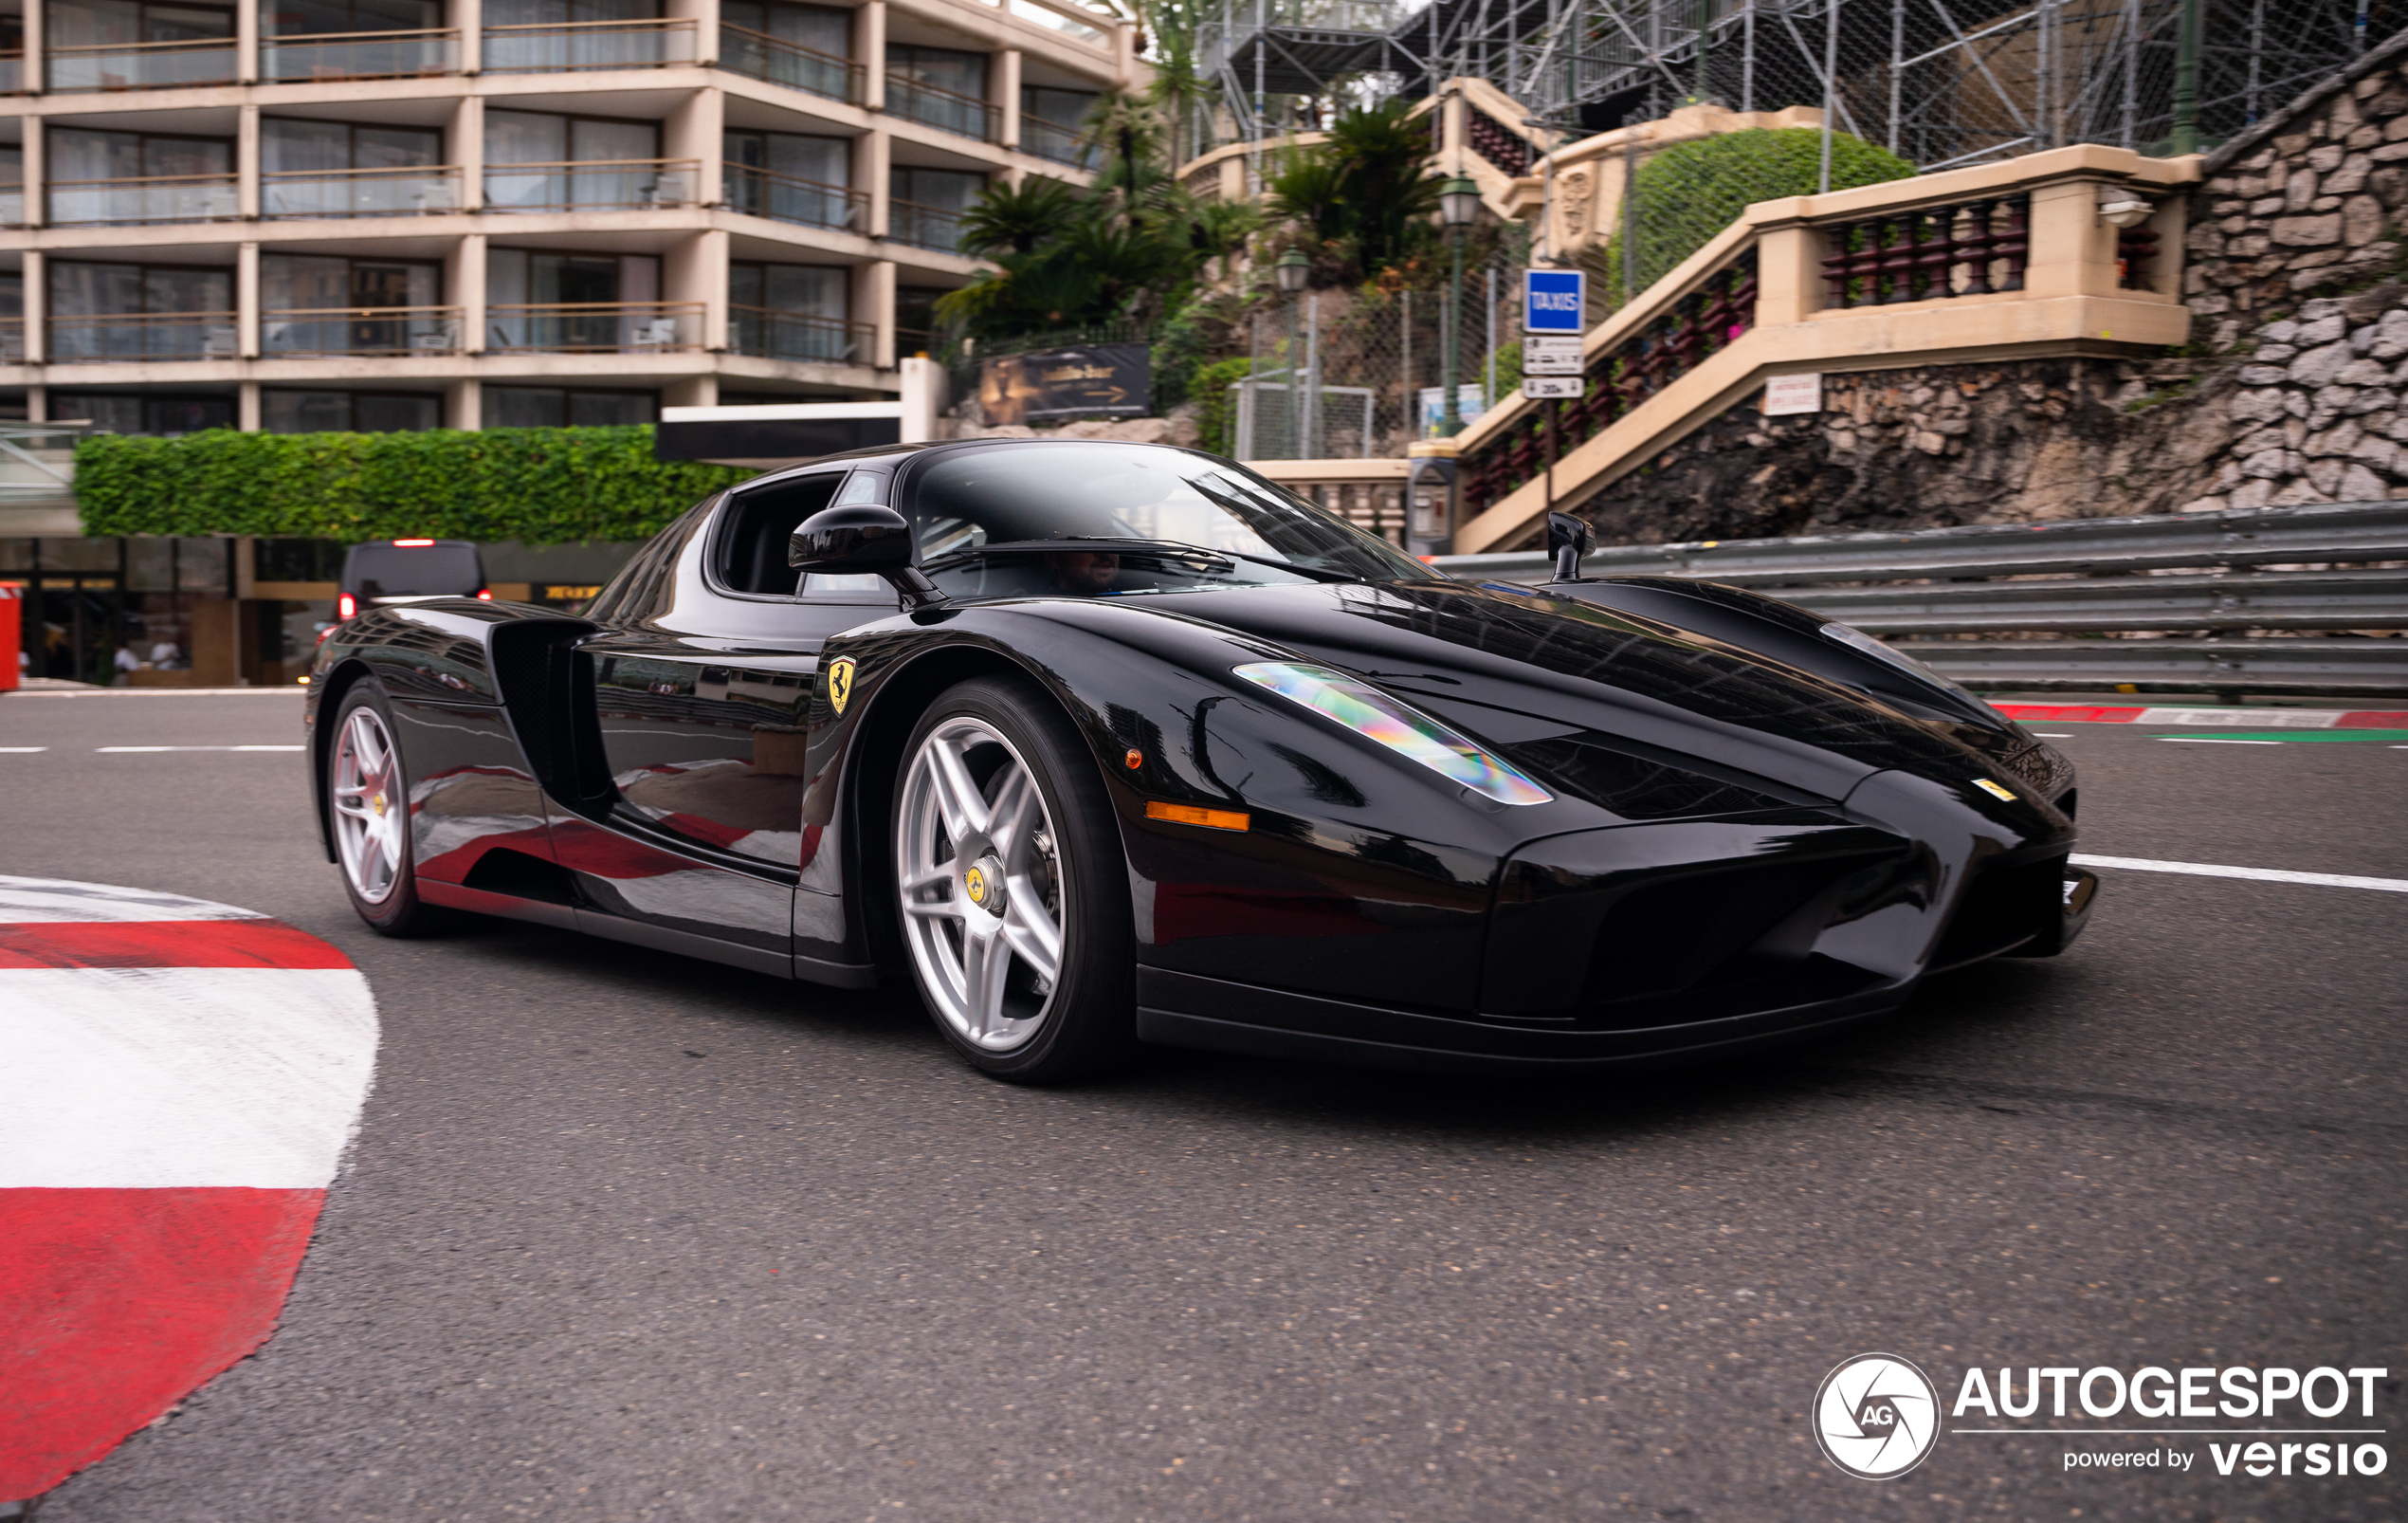 A beautiful Enzo shows up in Monaco